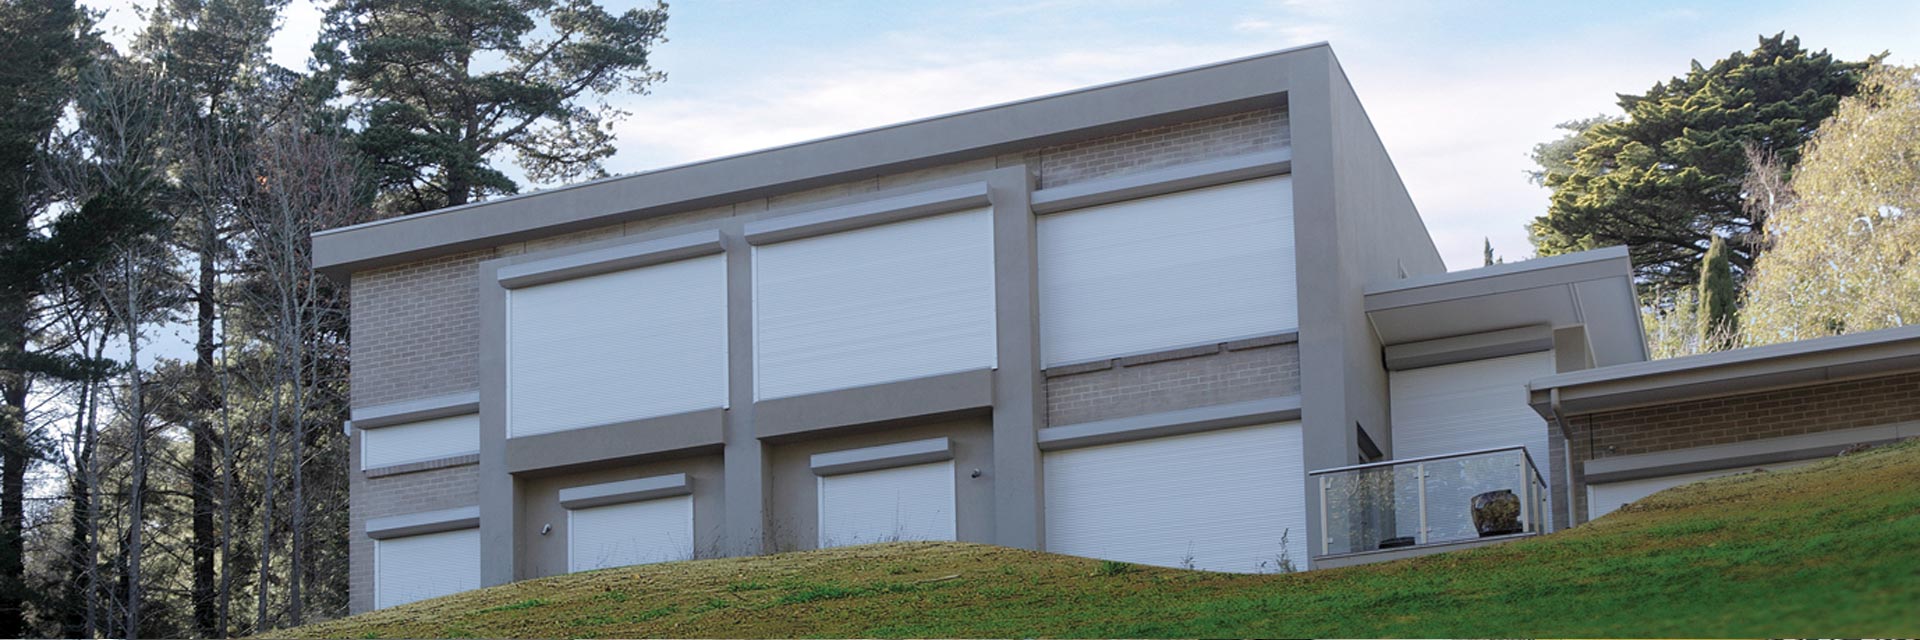 <h1>CycloneSafe Roller Shutter</h1><p>With the recent increase in extreme weather and storm conditions across Australia, protection from cyclones and severe storms has become paramount.</p><a  data-cke-saved-href='roller-shutters.html' href='roller-shutters.html'>Learn More</a>